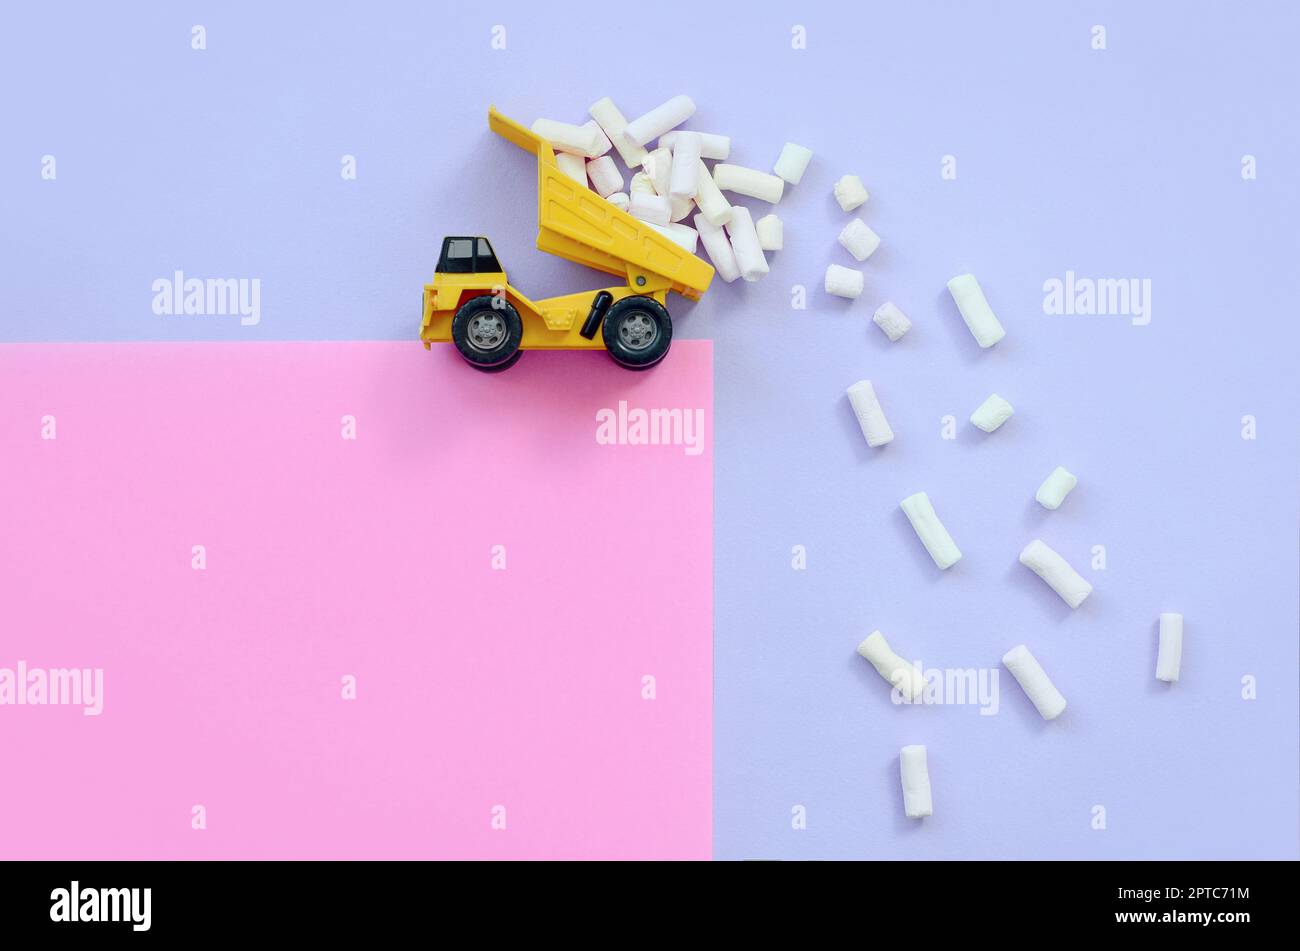 Yellow little toy dump truck throws marshmallow pieces from its raised back on a pastel violet and pink background. Flat lay minimal top view. Stock Photo